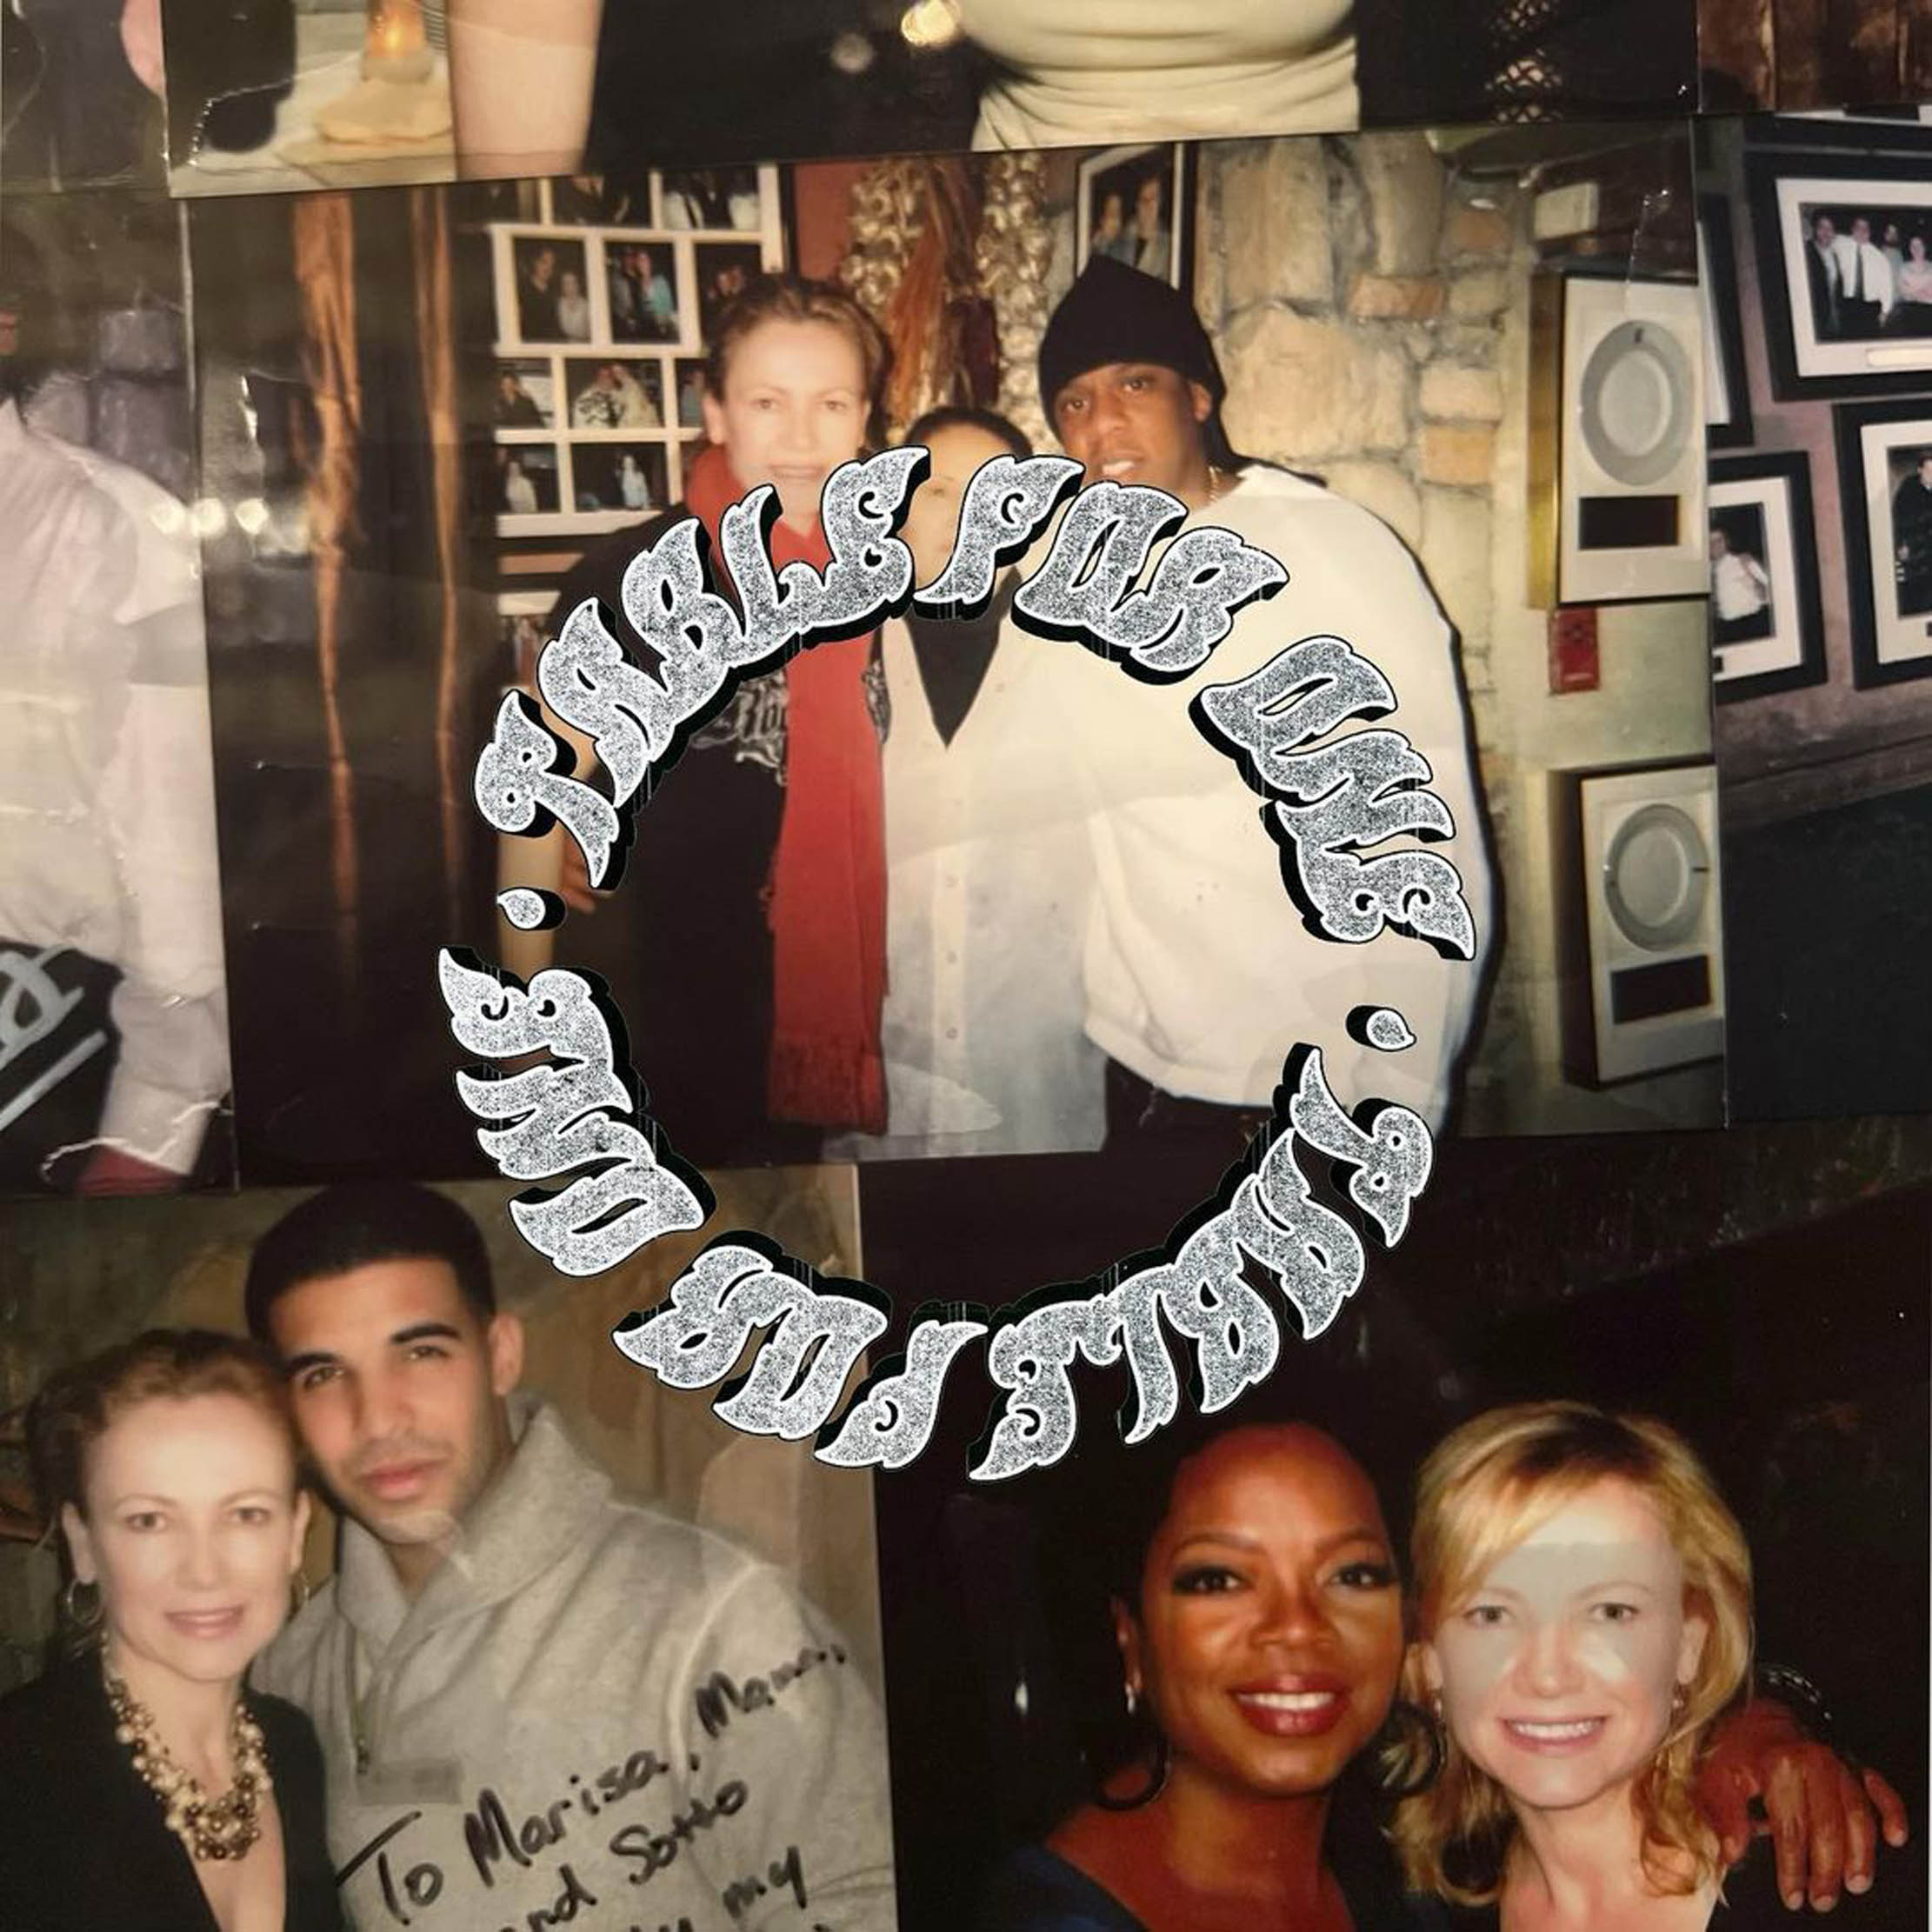 Ristorante Sotto Sotto Toronto Drake marisa sotto sotto restaurant Table For One 42 Sound SiriusXM HONESTLY NEVERMIND studio album guests twitter spotify apple music tidal ovo